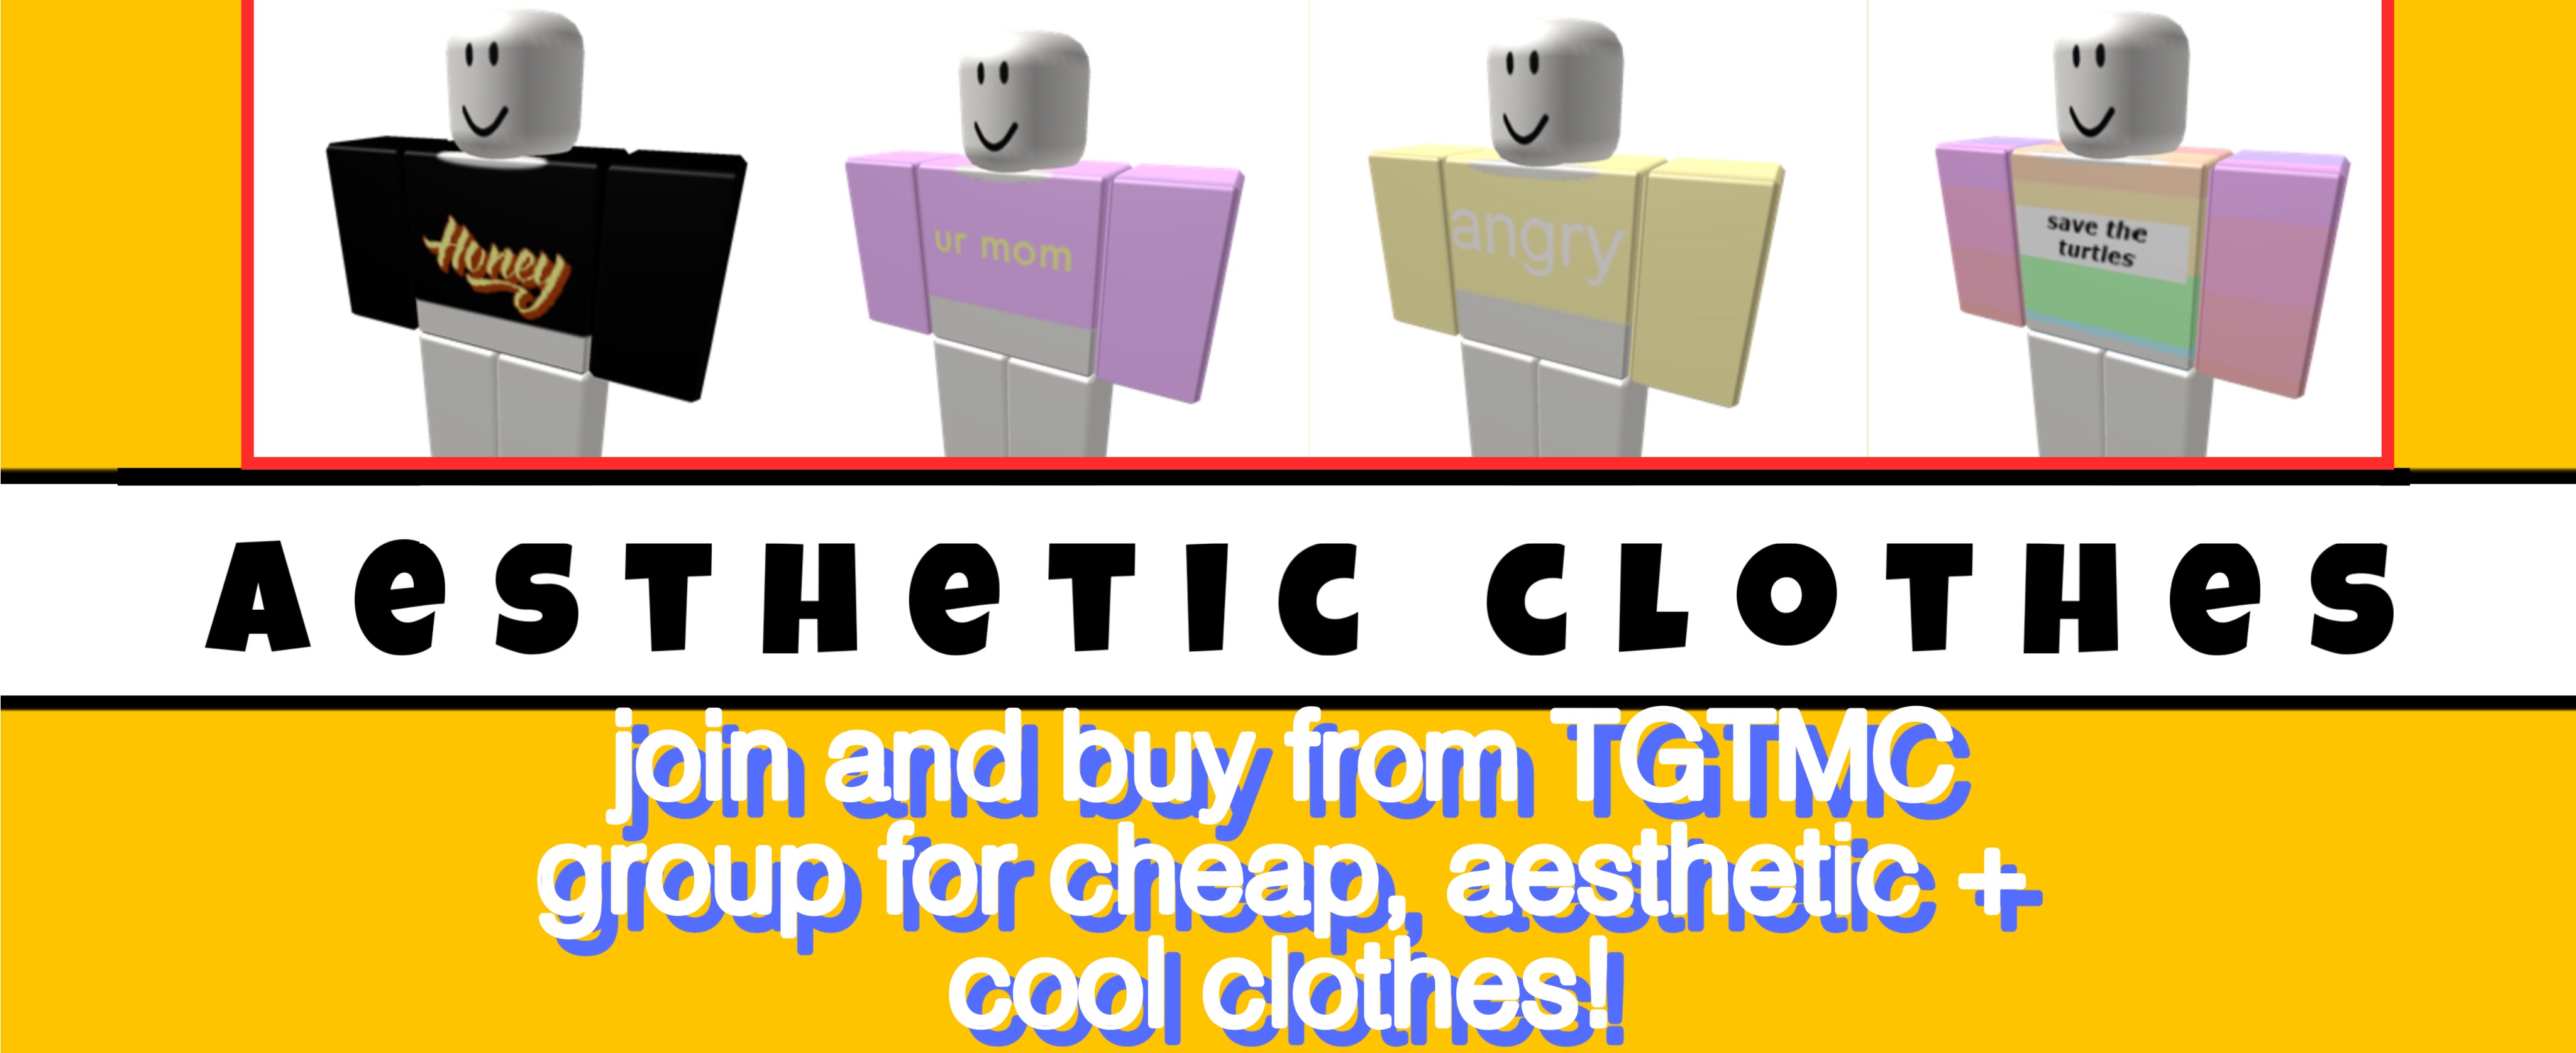 Good Aesthetic Groups Roblox - roblox wiki lookvector roblox free valkyrie